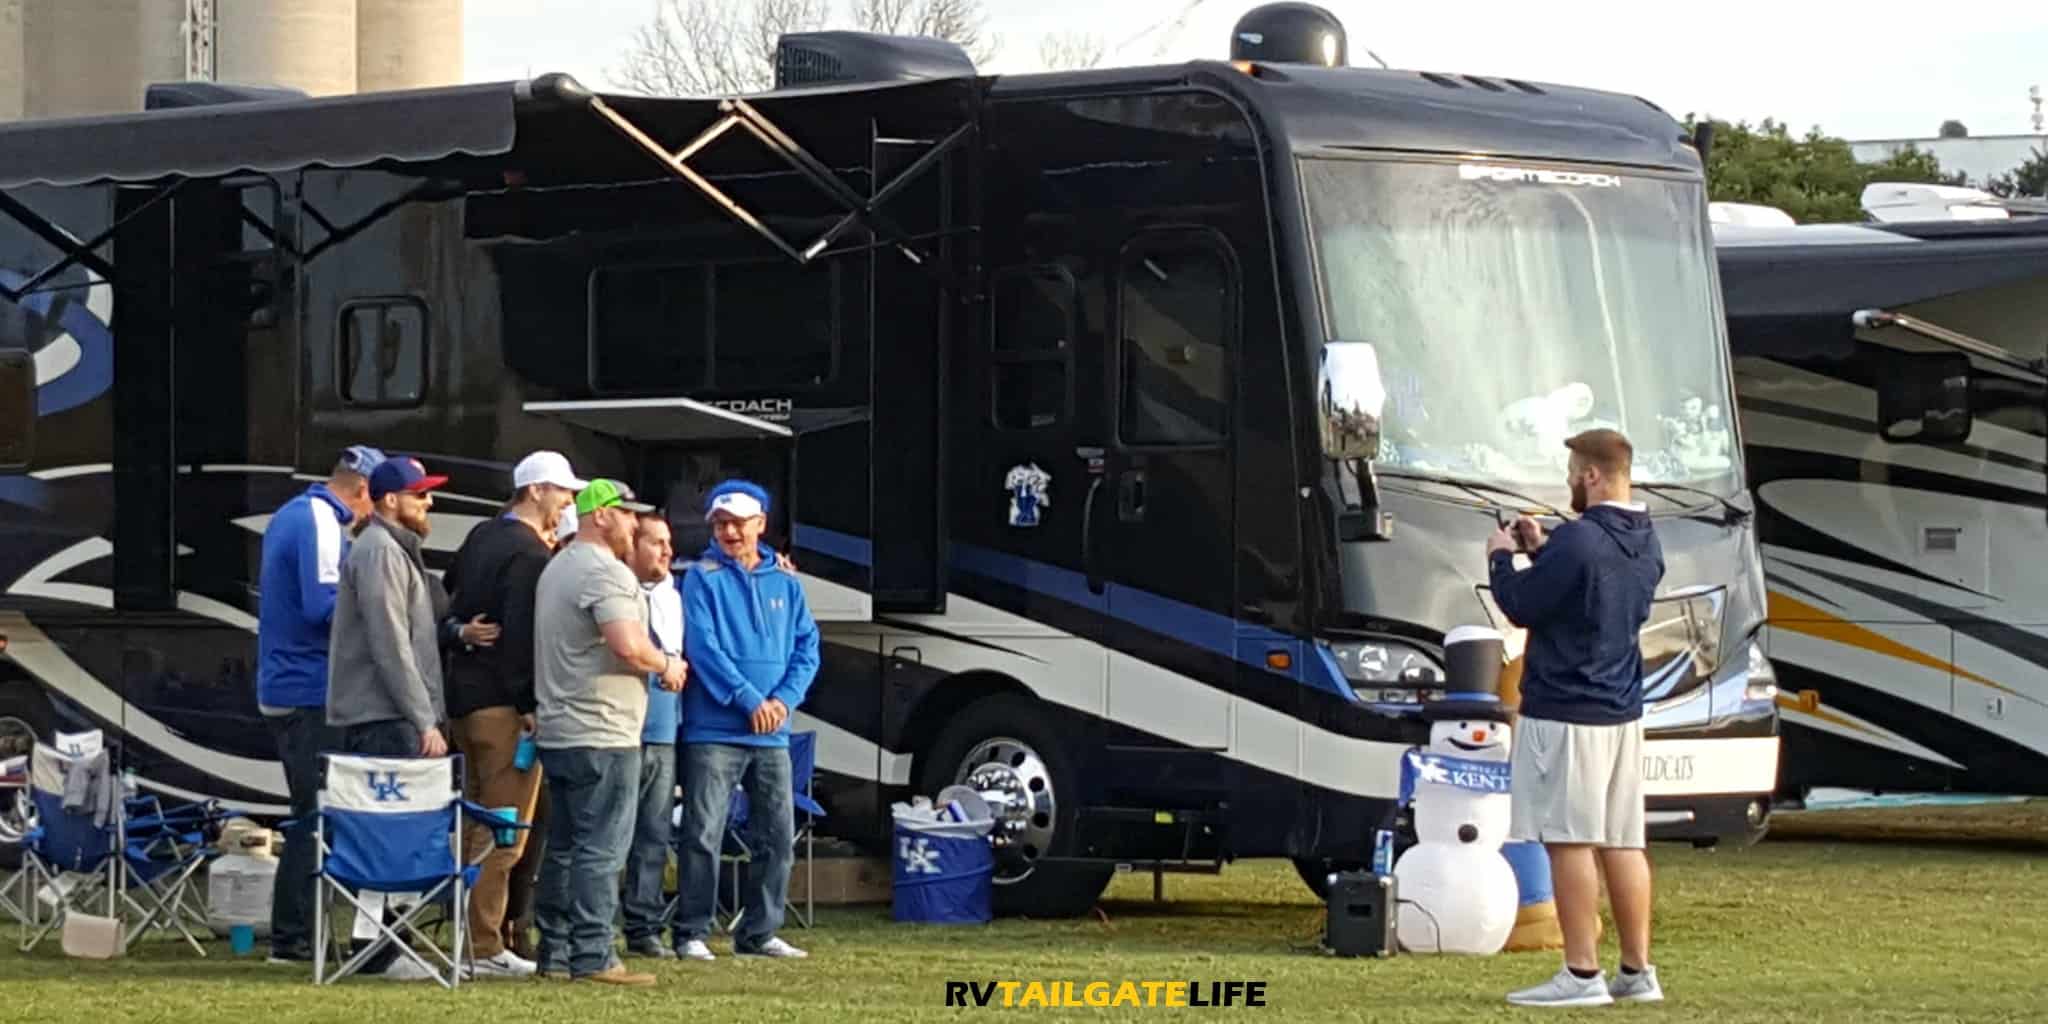 Jacksonville Tailgating at the TaxSlayer Bowl